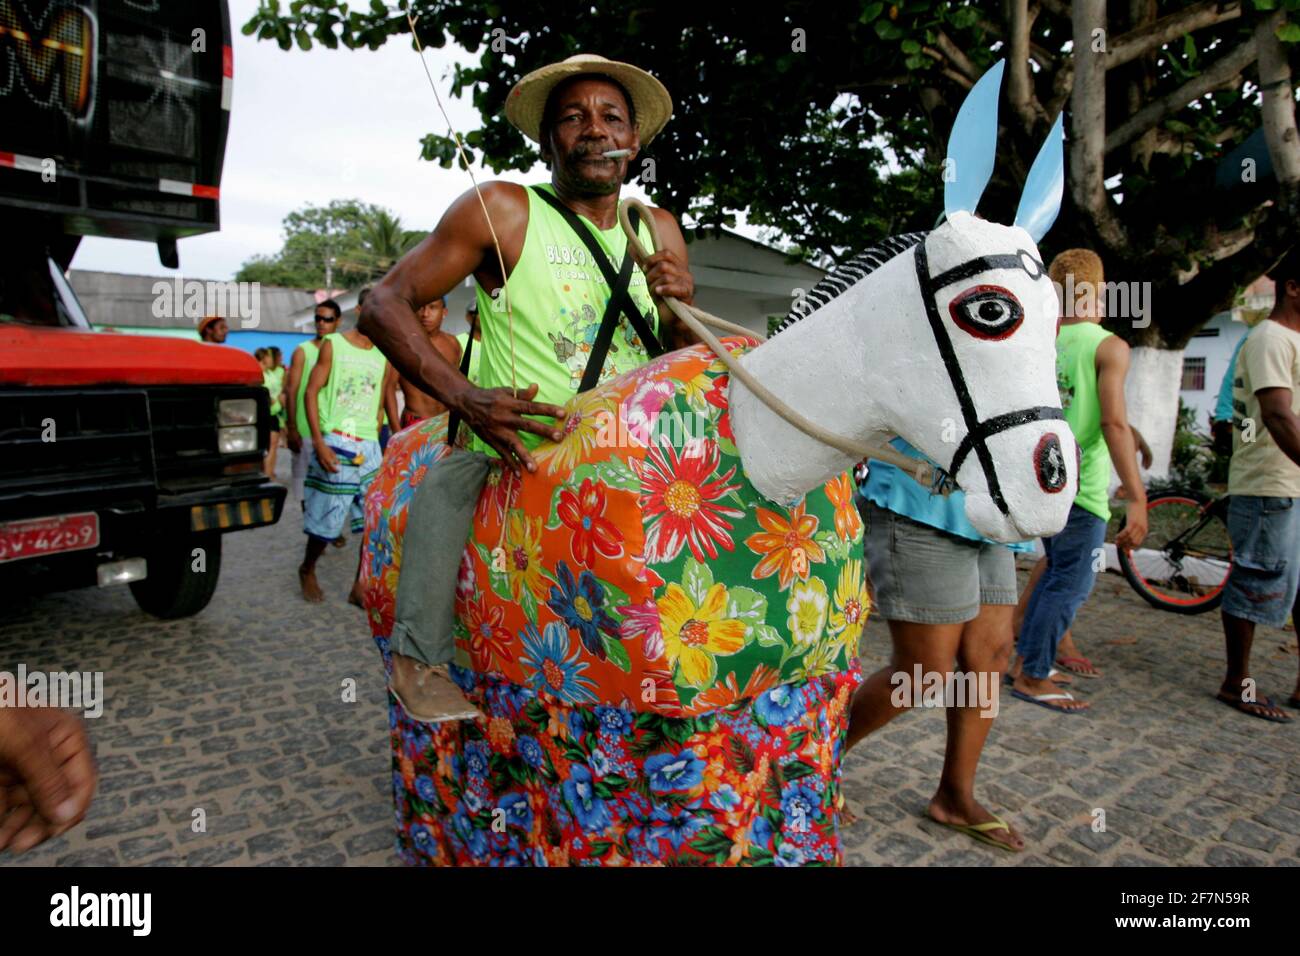 caravelas, bahia / brazil - march 5, 2011: members of the carnival block 'Burrinha' are seen in the Ponta de Areia district in the city of Caravelas. Stock Photo